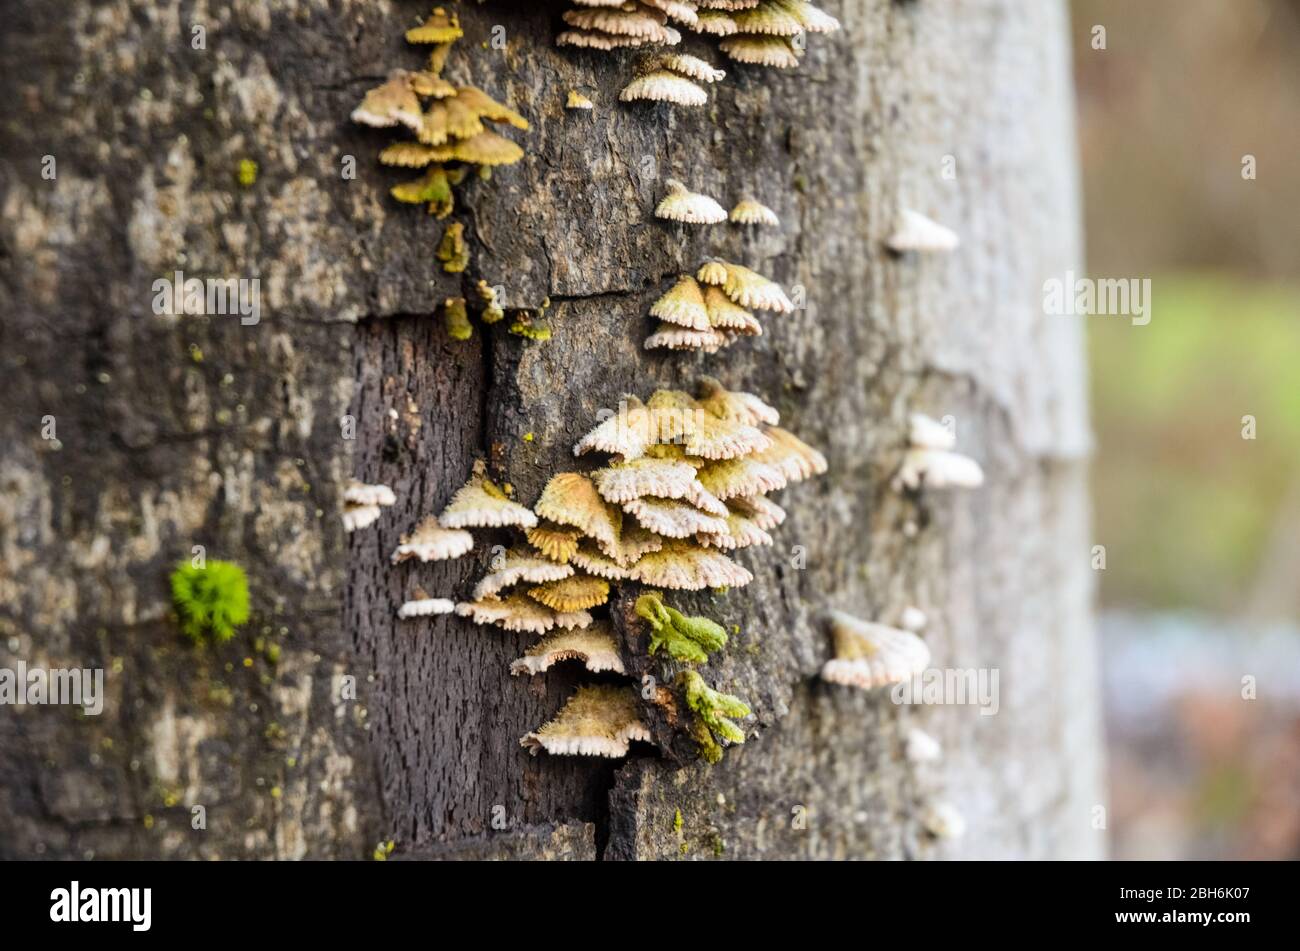 Agaricomycetes, Polyporales fungi on a tree trunk in the forest in Rhineland-Palatinate, Germany, Western Europe Stock Photo